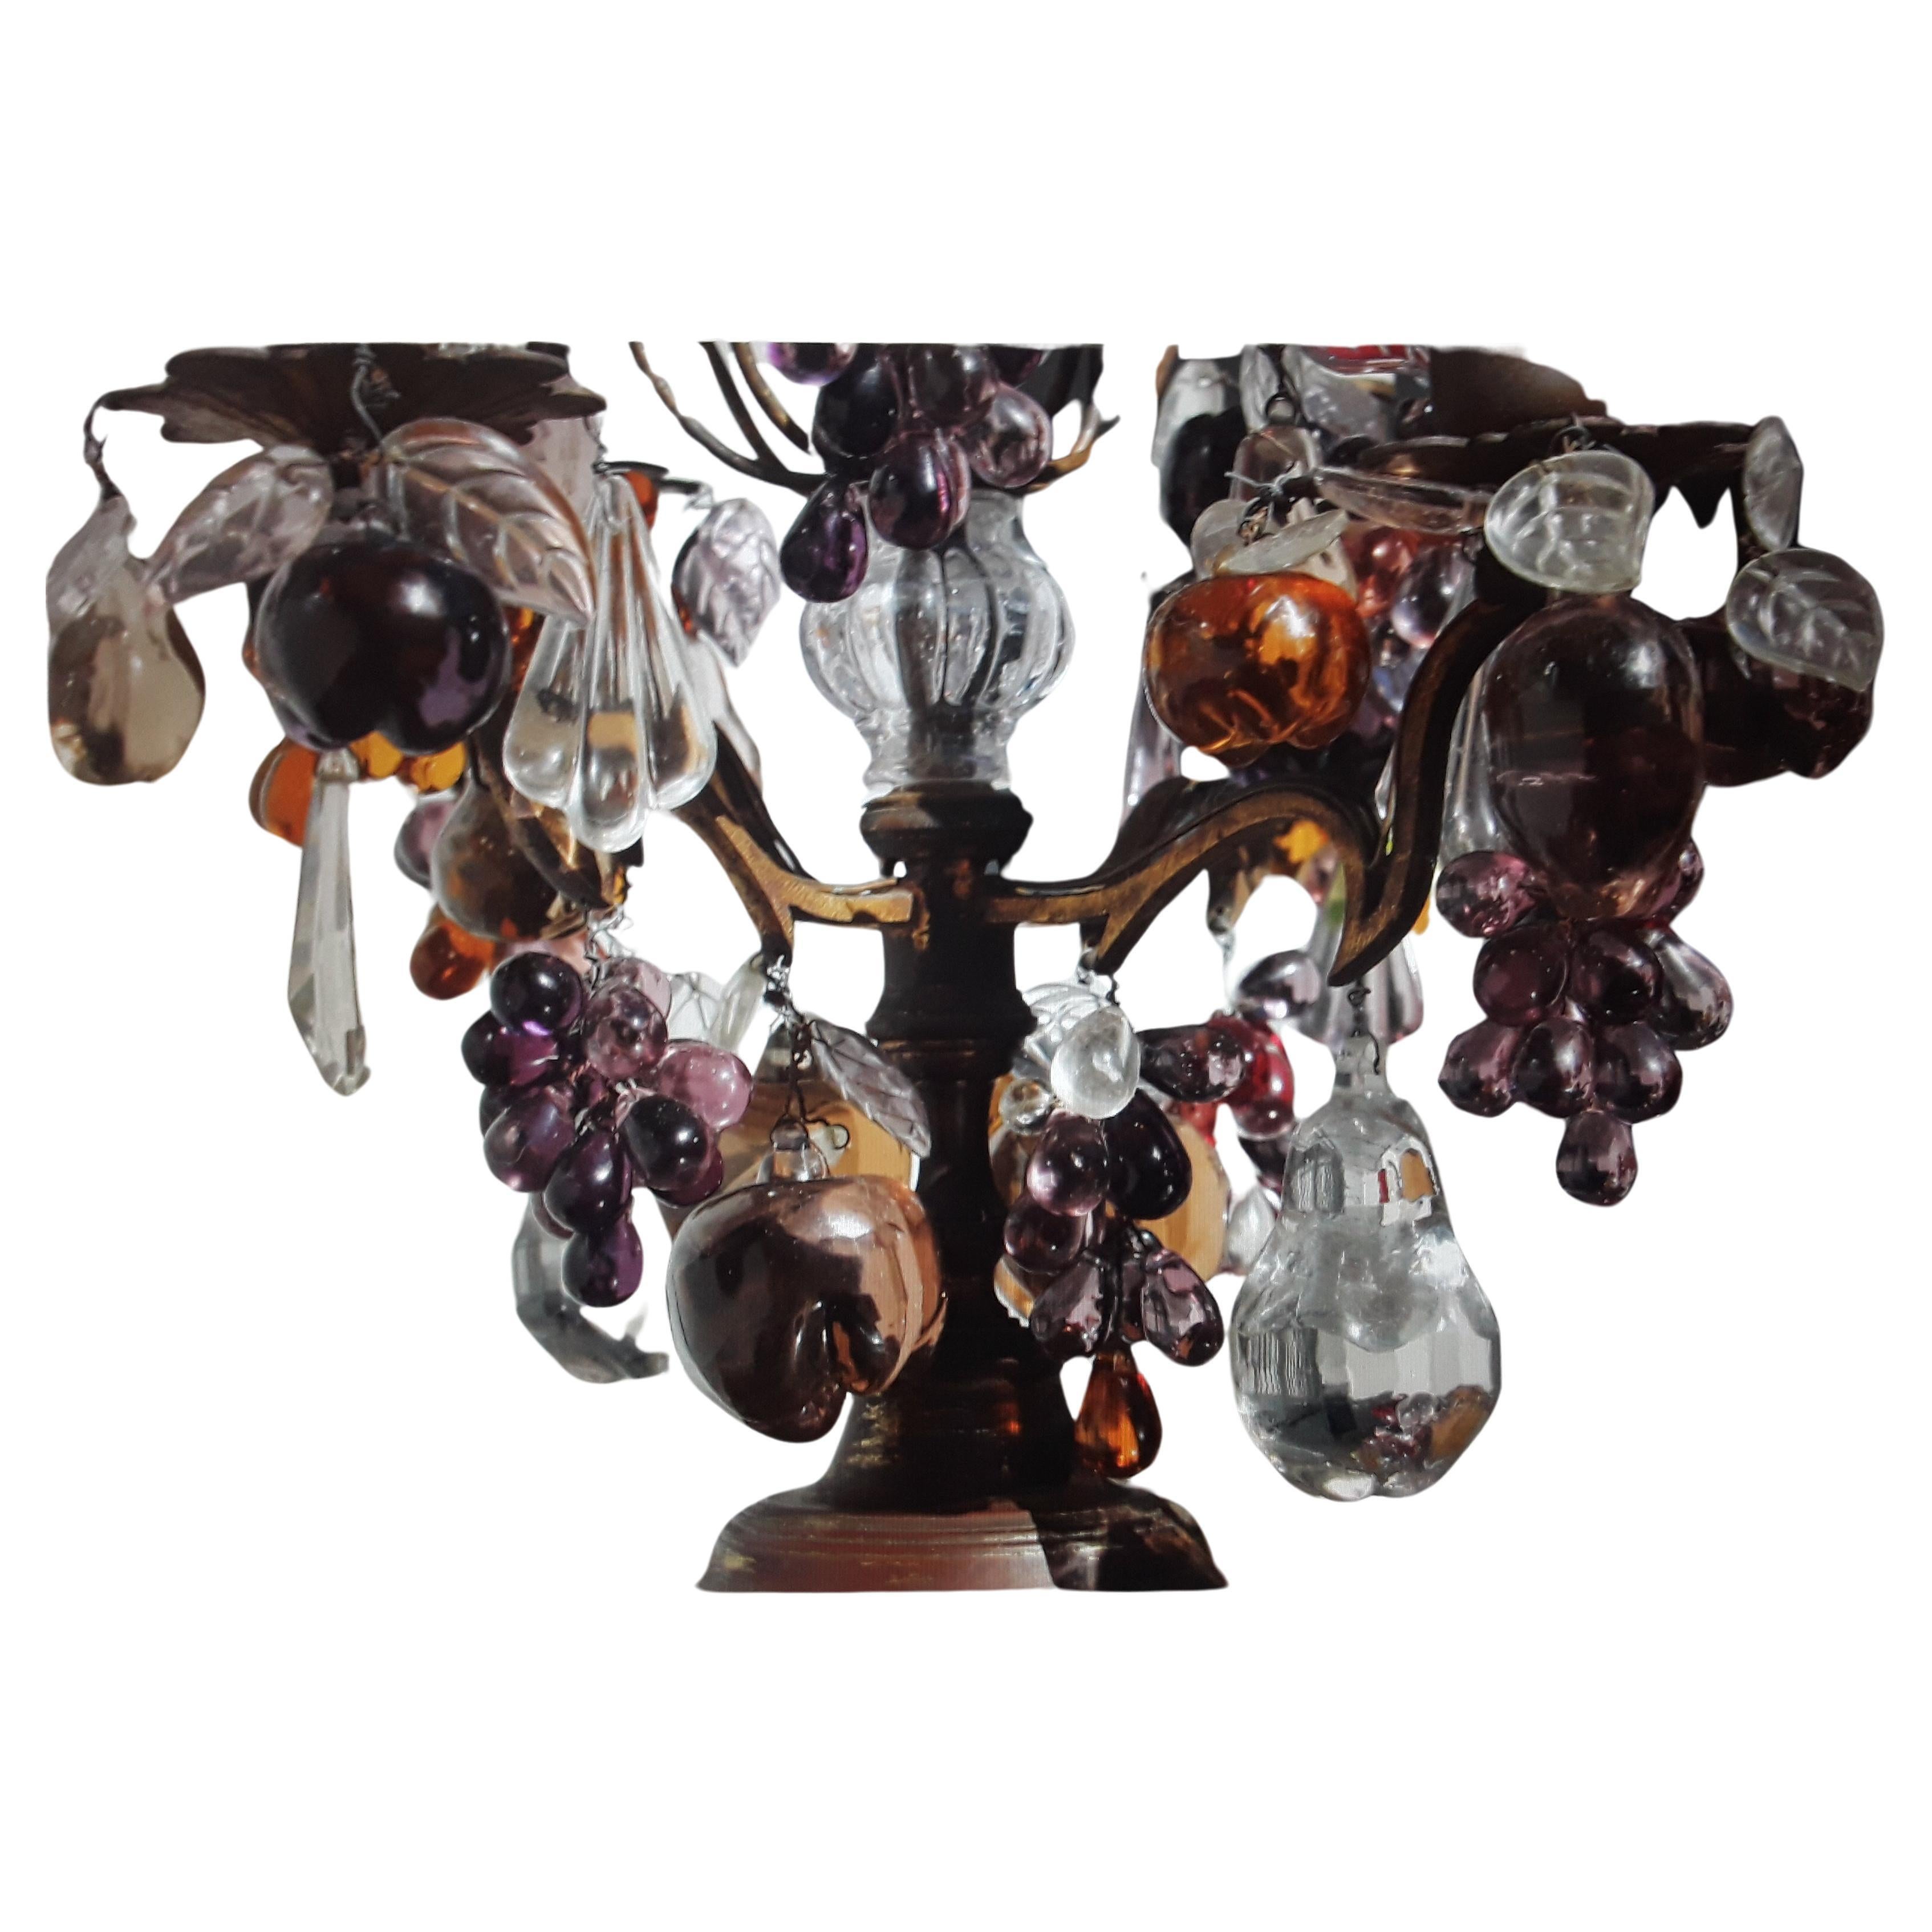 c1880 French Louis XV style Bronze Table Lamp/ Girandole Laden with alot of Murano Crystal Fruit. This lamp, now electrified is stunning. Please look closely at pictures, they describe well.